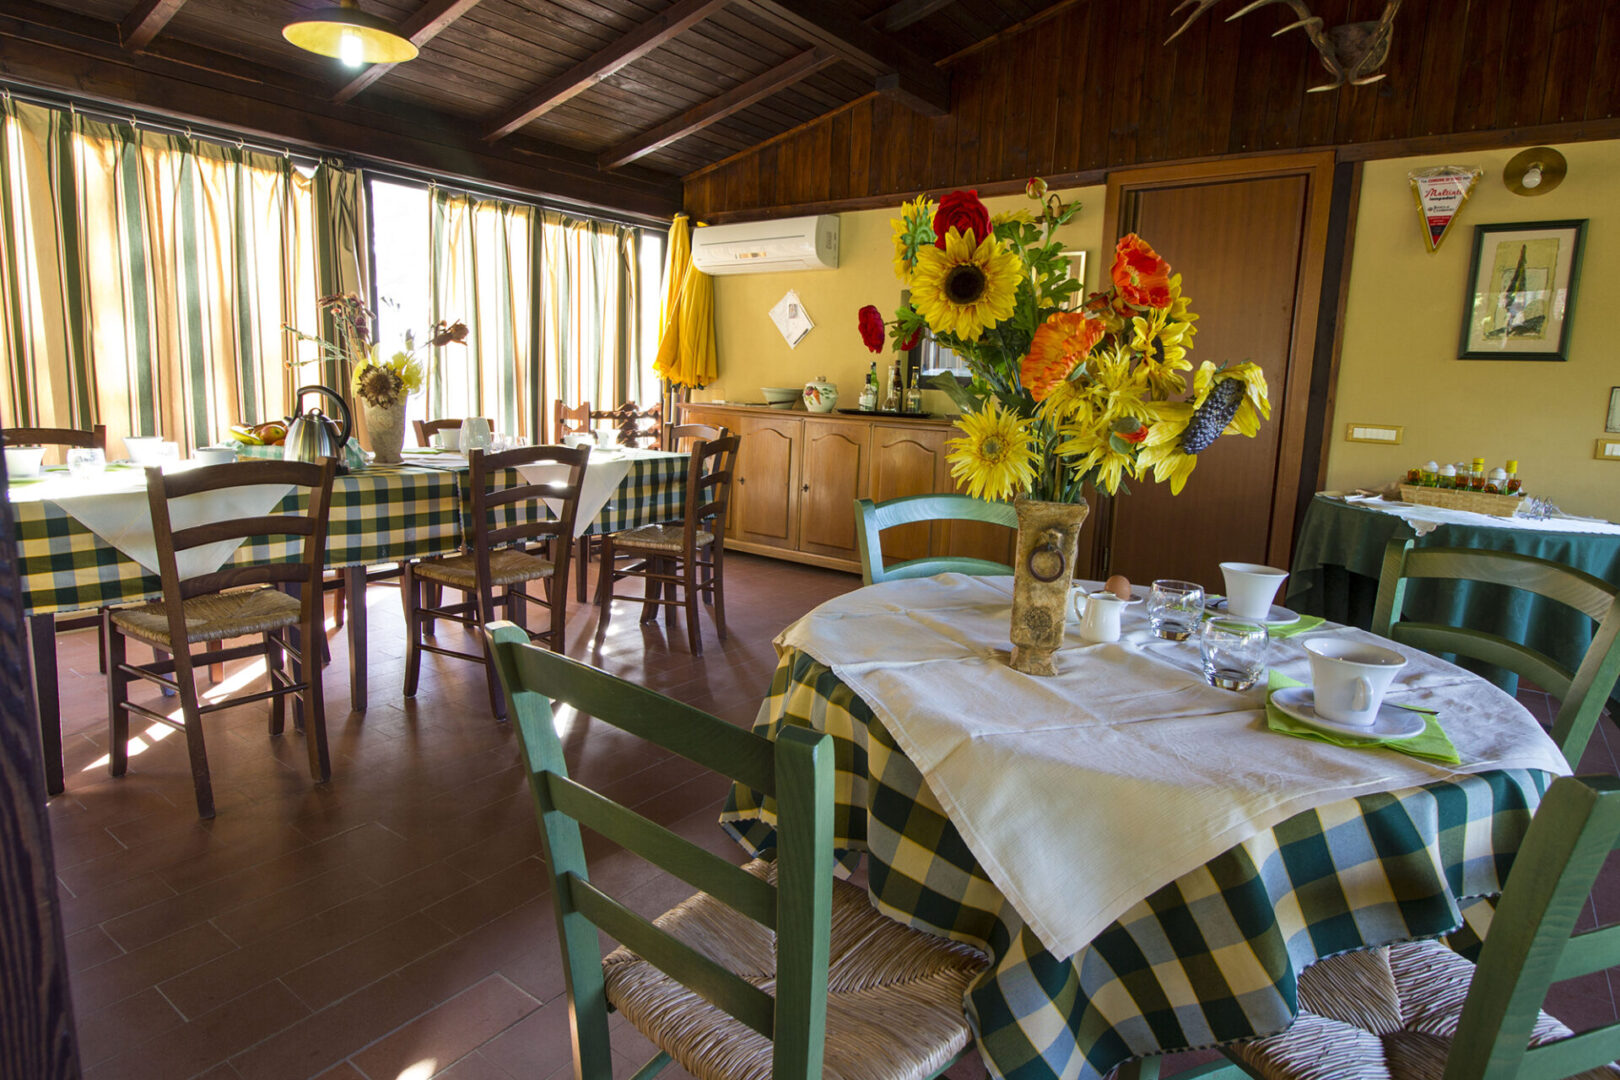 A dining room with tables and chairs, sunflowers in vases.